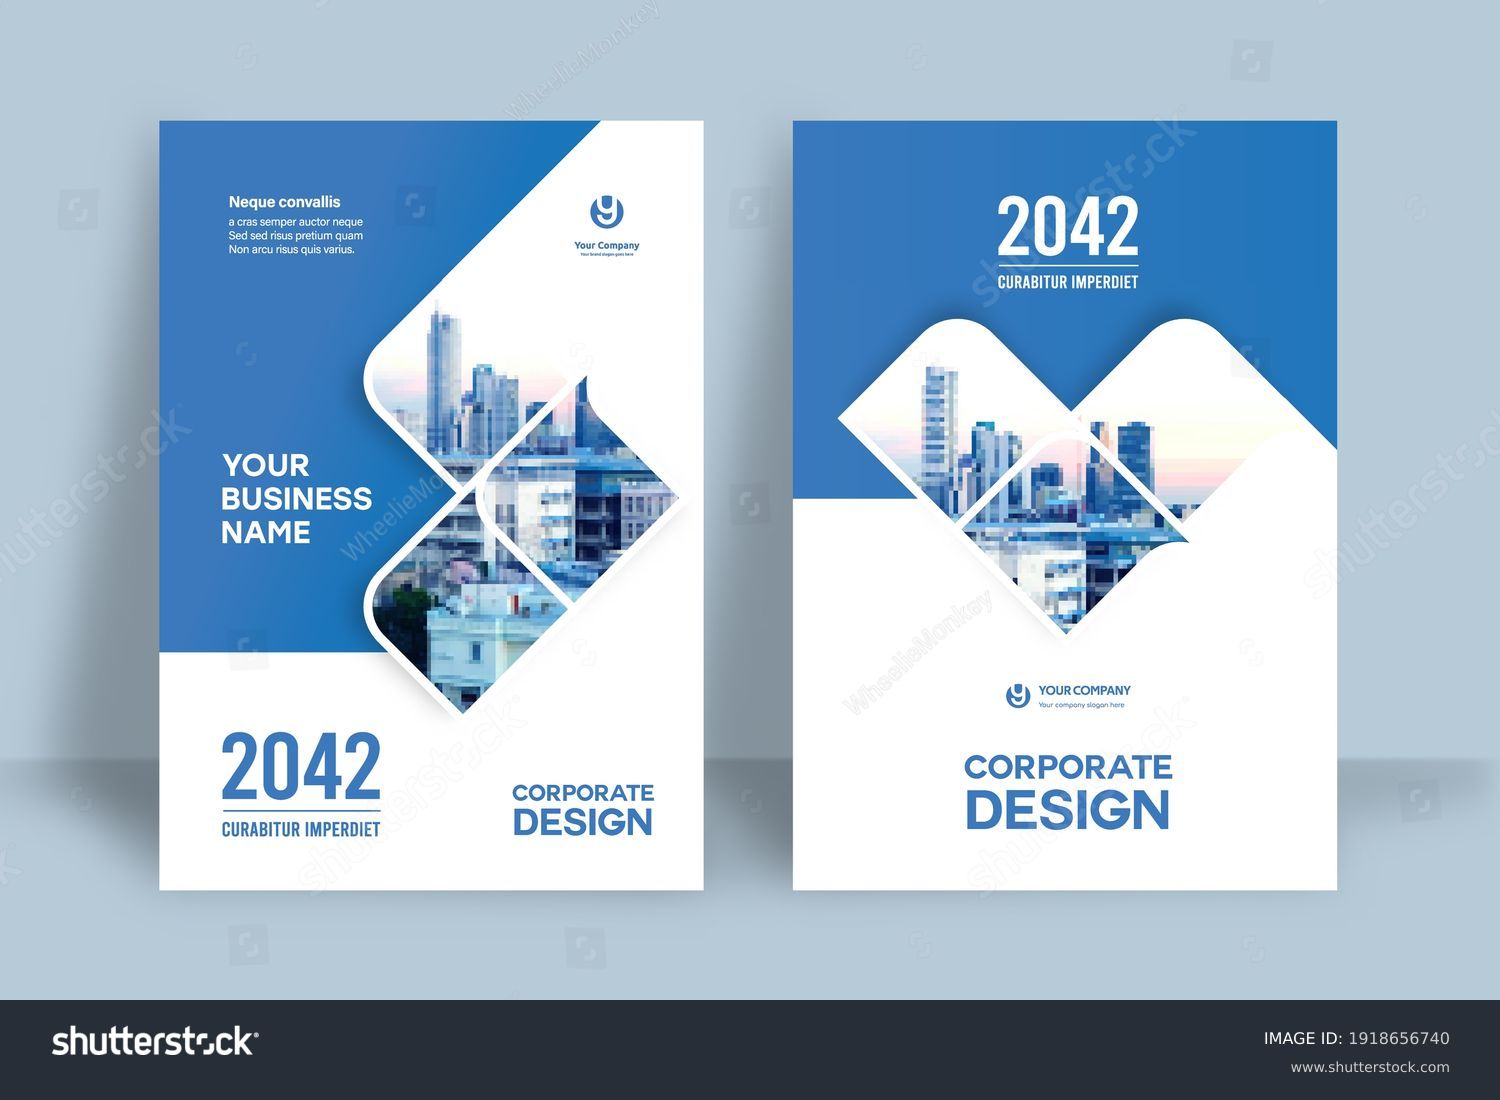 Corporate Book Cover Design Template in A4. Can be adapt to Brochure, Annual Report, Magazine,Poster, Business Presentation, Portfolio, Flyer, Banner, Website. #1918656740